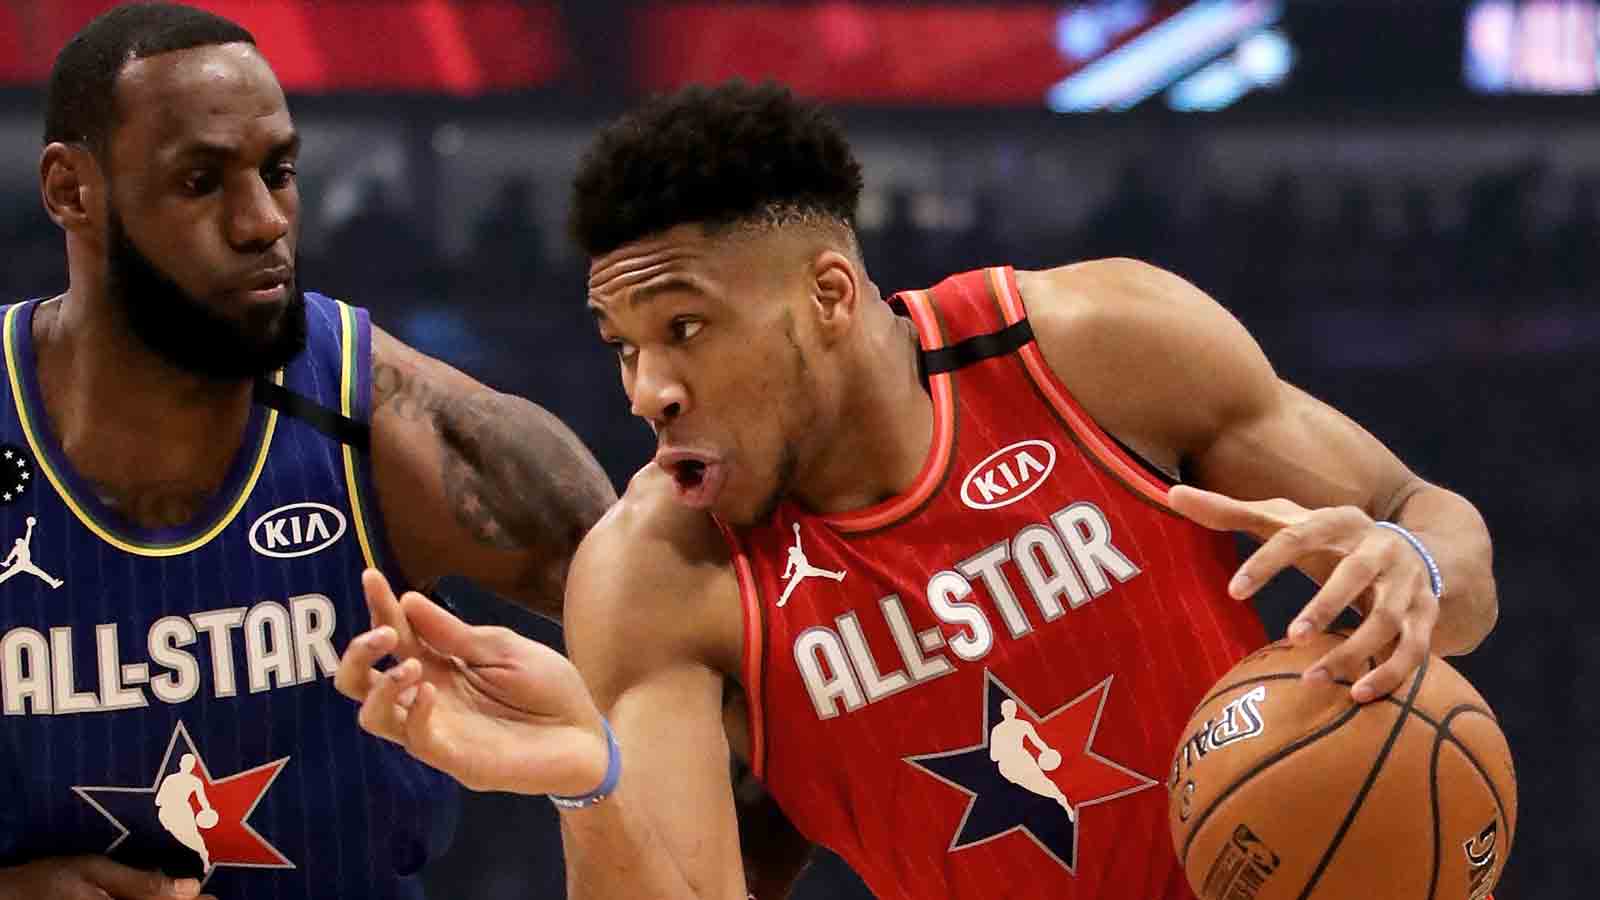 The most players from one team in an NBA All-Star Game